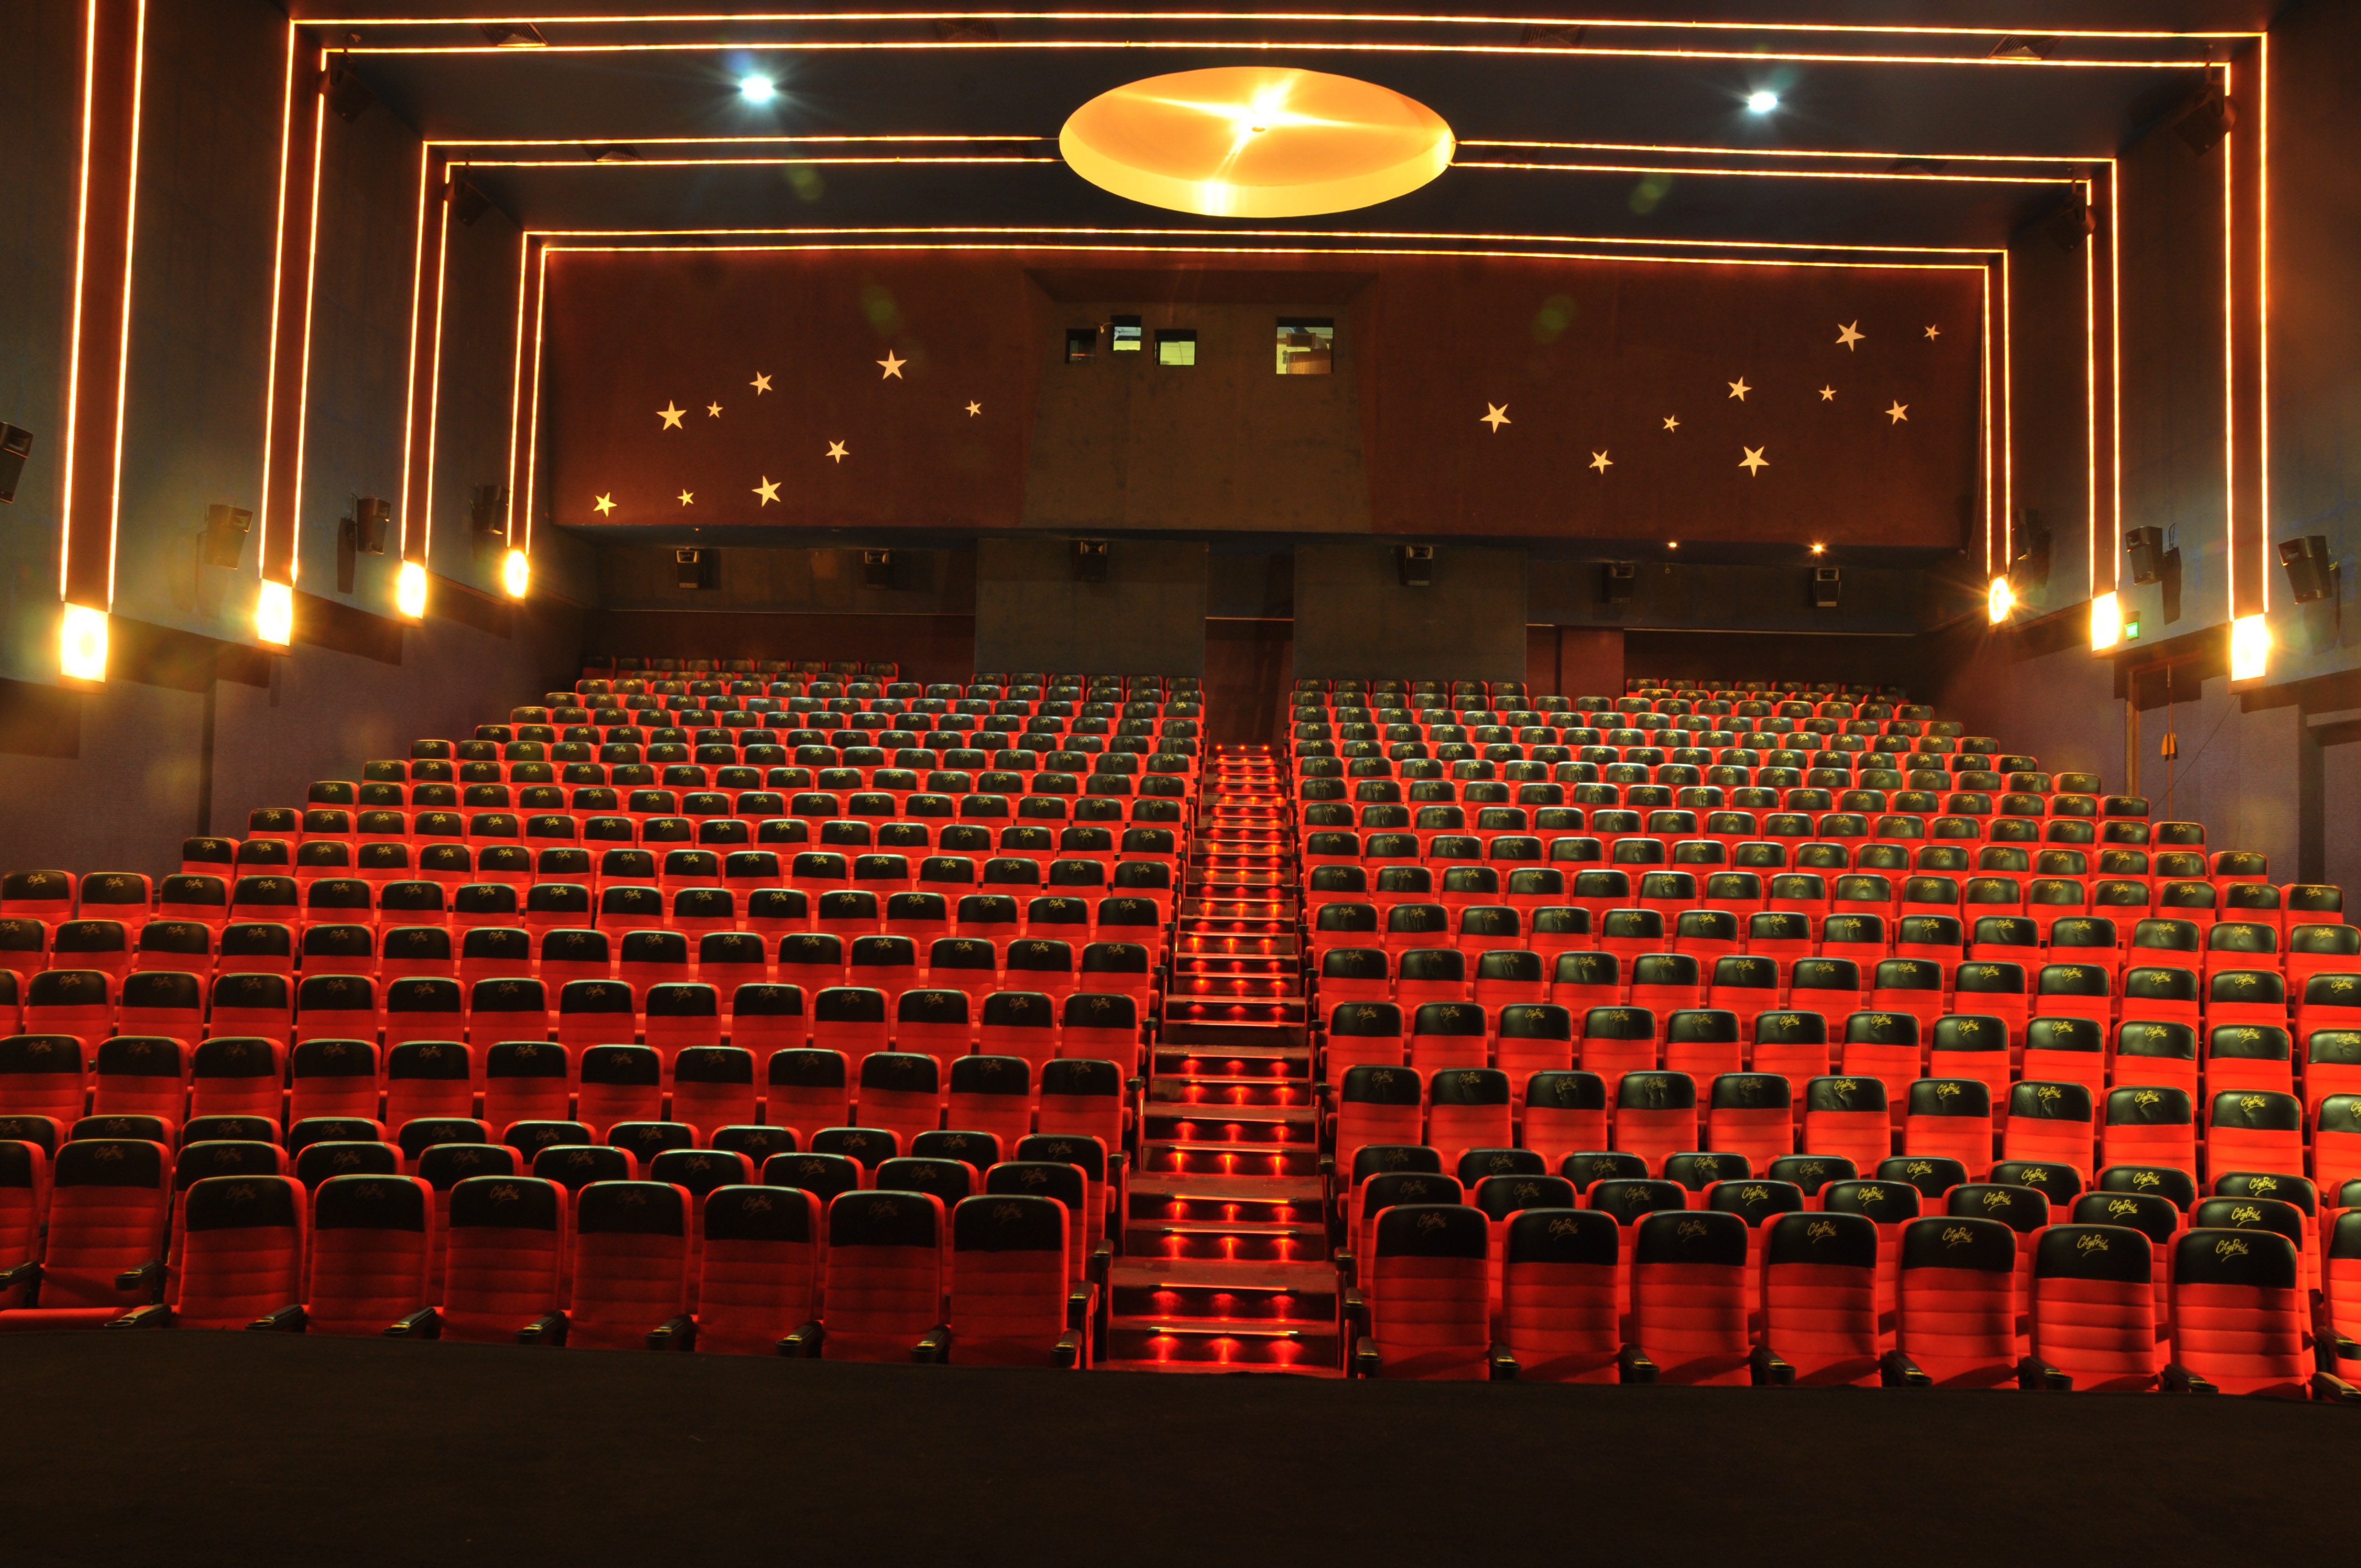 HARMAN Professional Solutions Provides an Immersive Audio Experience for CityPride Multiplexes